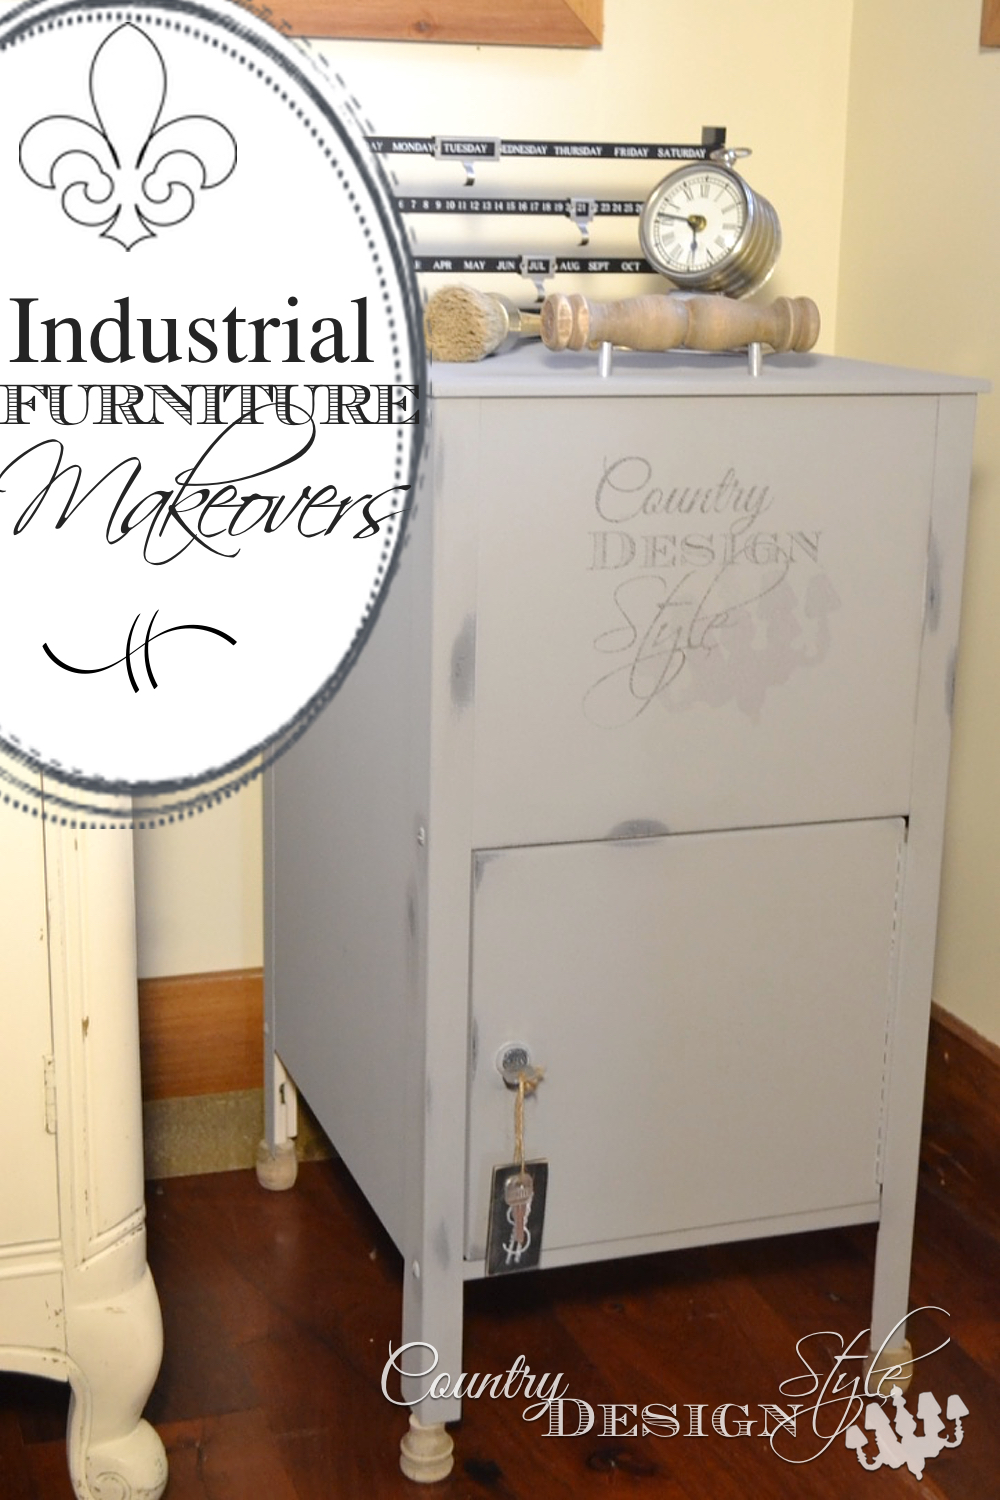 Industrial furniture makeovers. Click to get inspired to update furniture to industrial farmhouse style with these easy DIY tips. Country Design Style